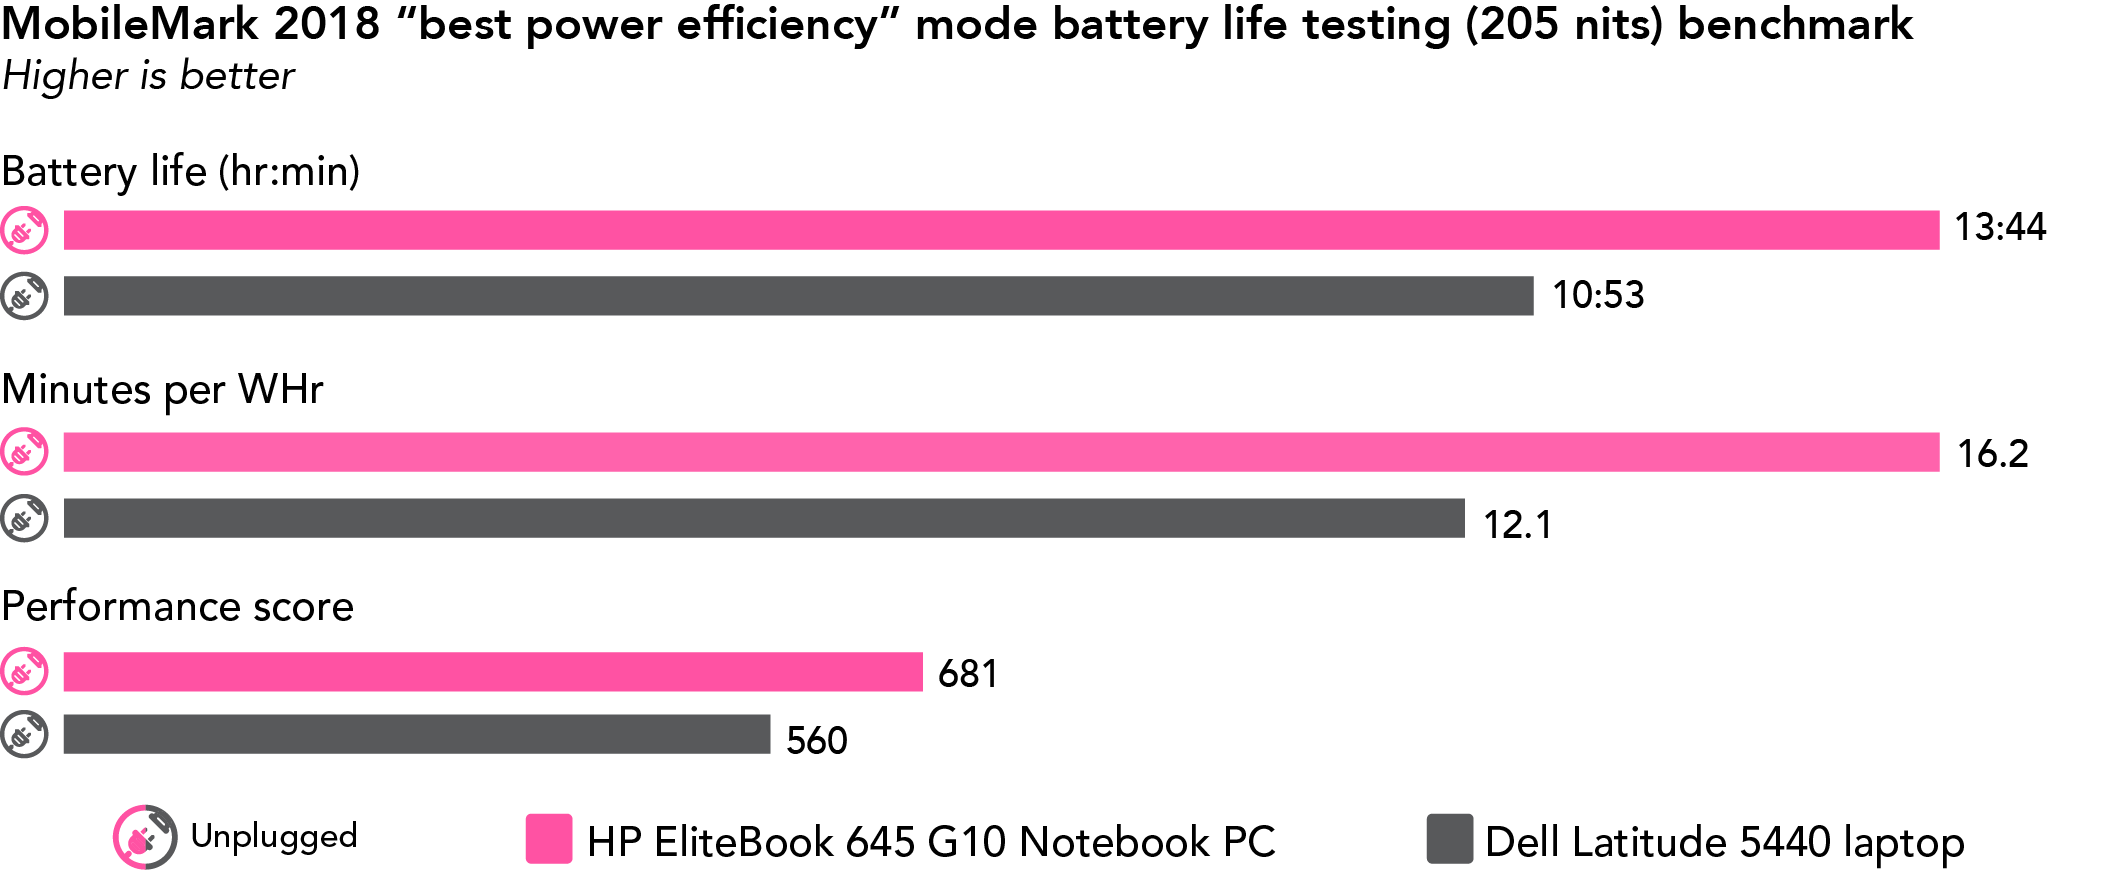 Chart of MobileMark 2018 “best power efficiency” mode battery life testing (205 nits) benchmark results. Higher is better. HP EliteBook 645 G10 Notebook PC has 13 hours and 44 minutes of battery life, 16.2 minutes per WHr, and a 681 performance score. Dell Latitude 5440 laptop has 10 hours and 53 minutes of battery life, 12.1 minutes per WHr, and a 560 performance score.